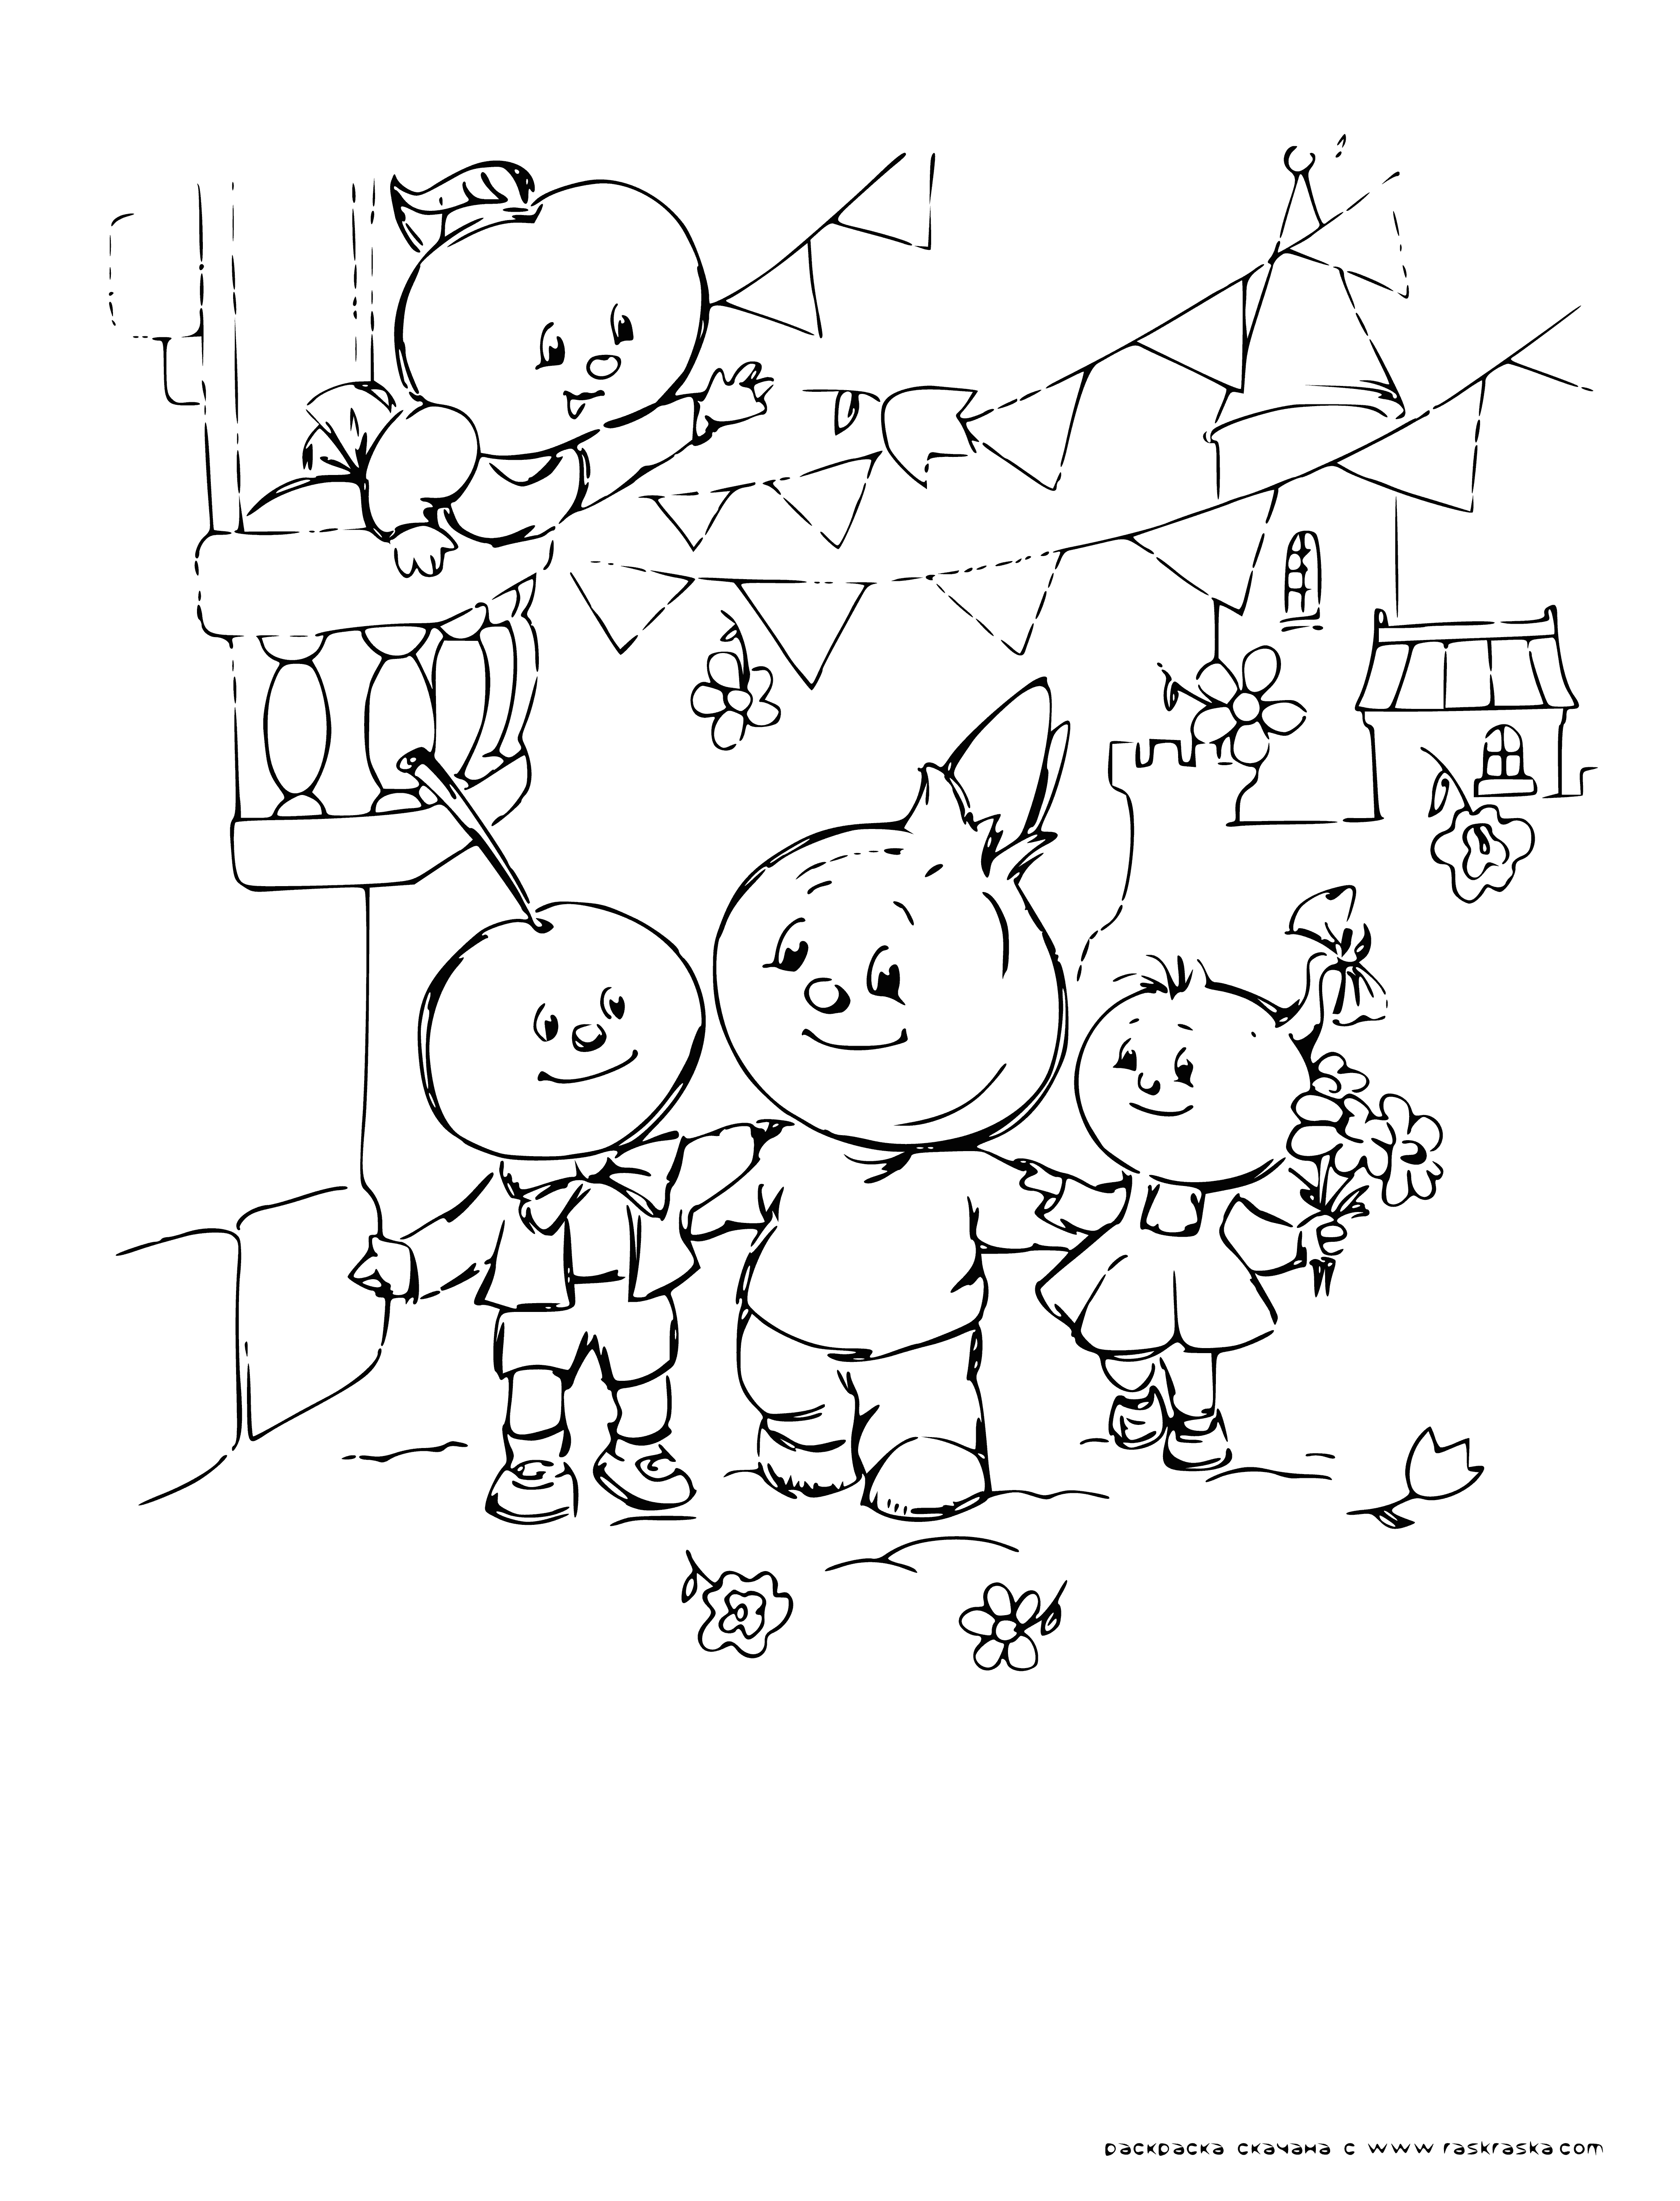 coloring page: Friends celebrating a victory, happy and proud, holding hands & hugging. #TogetherWeWin